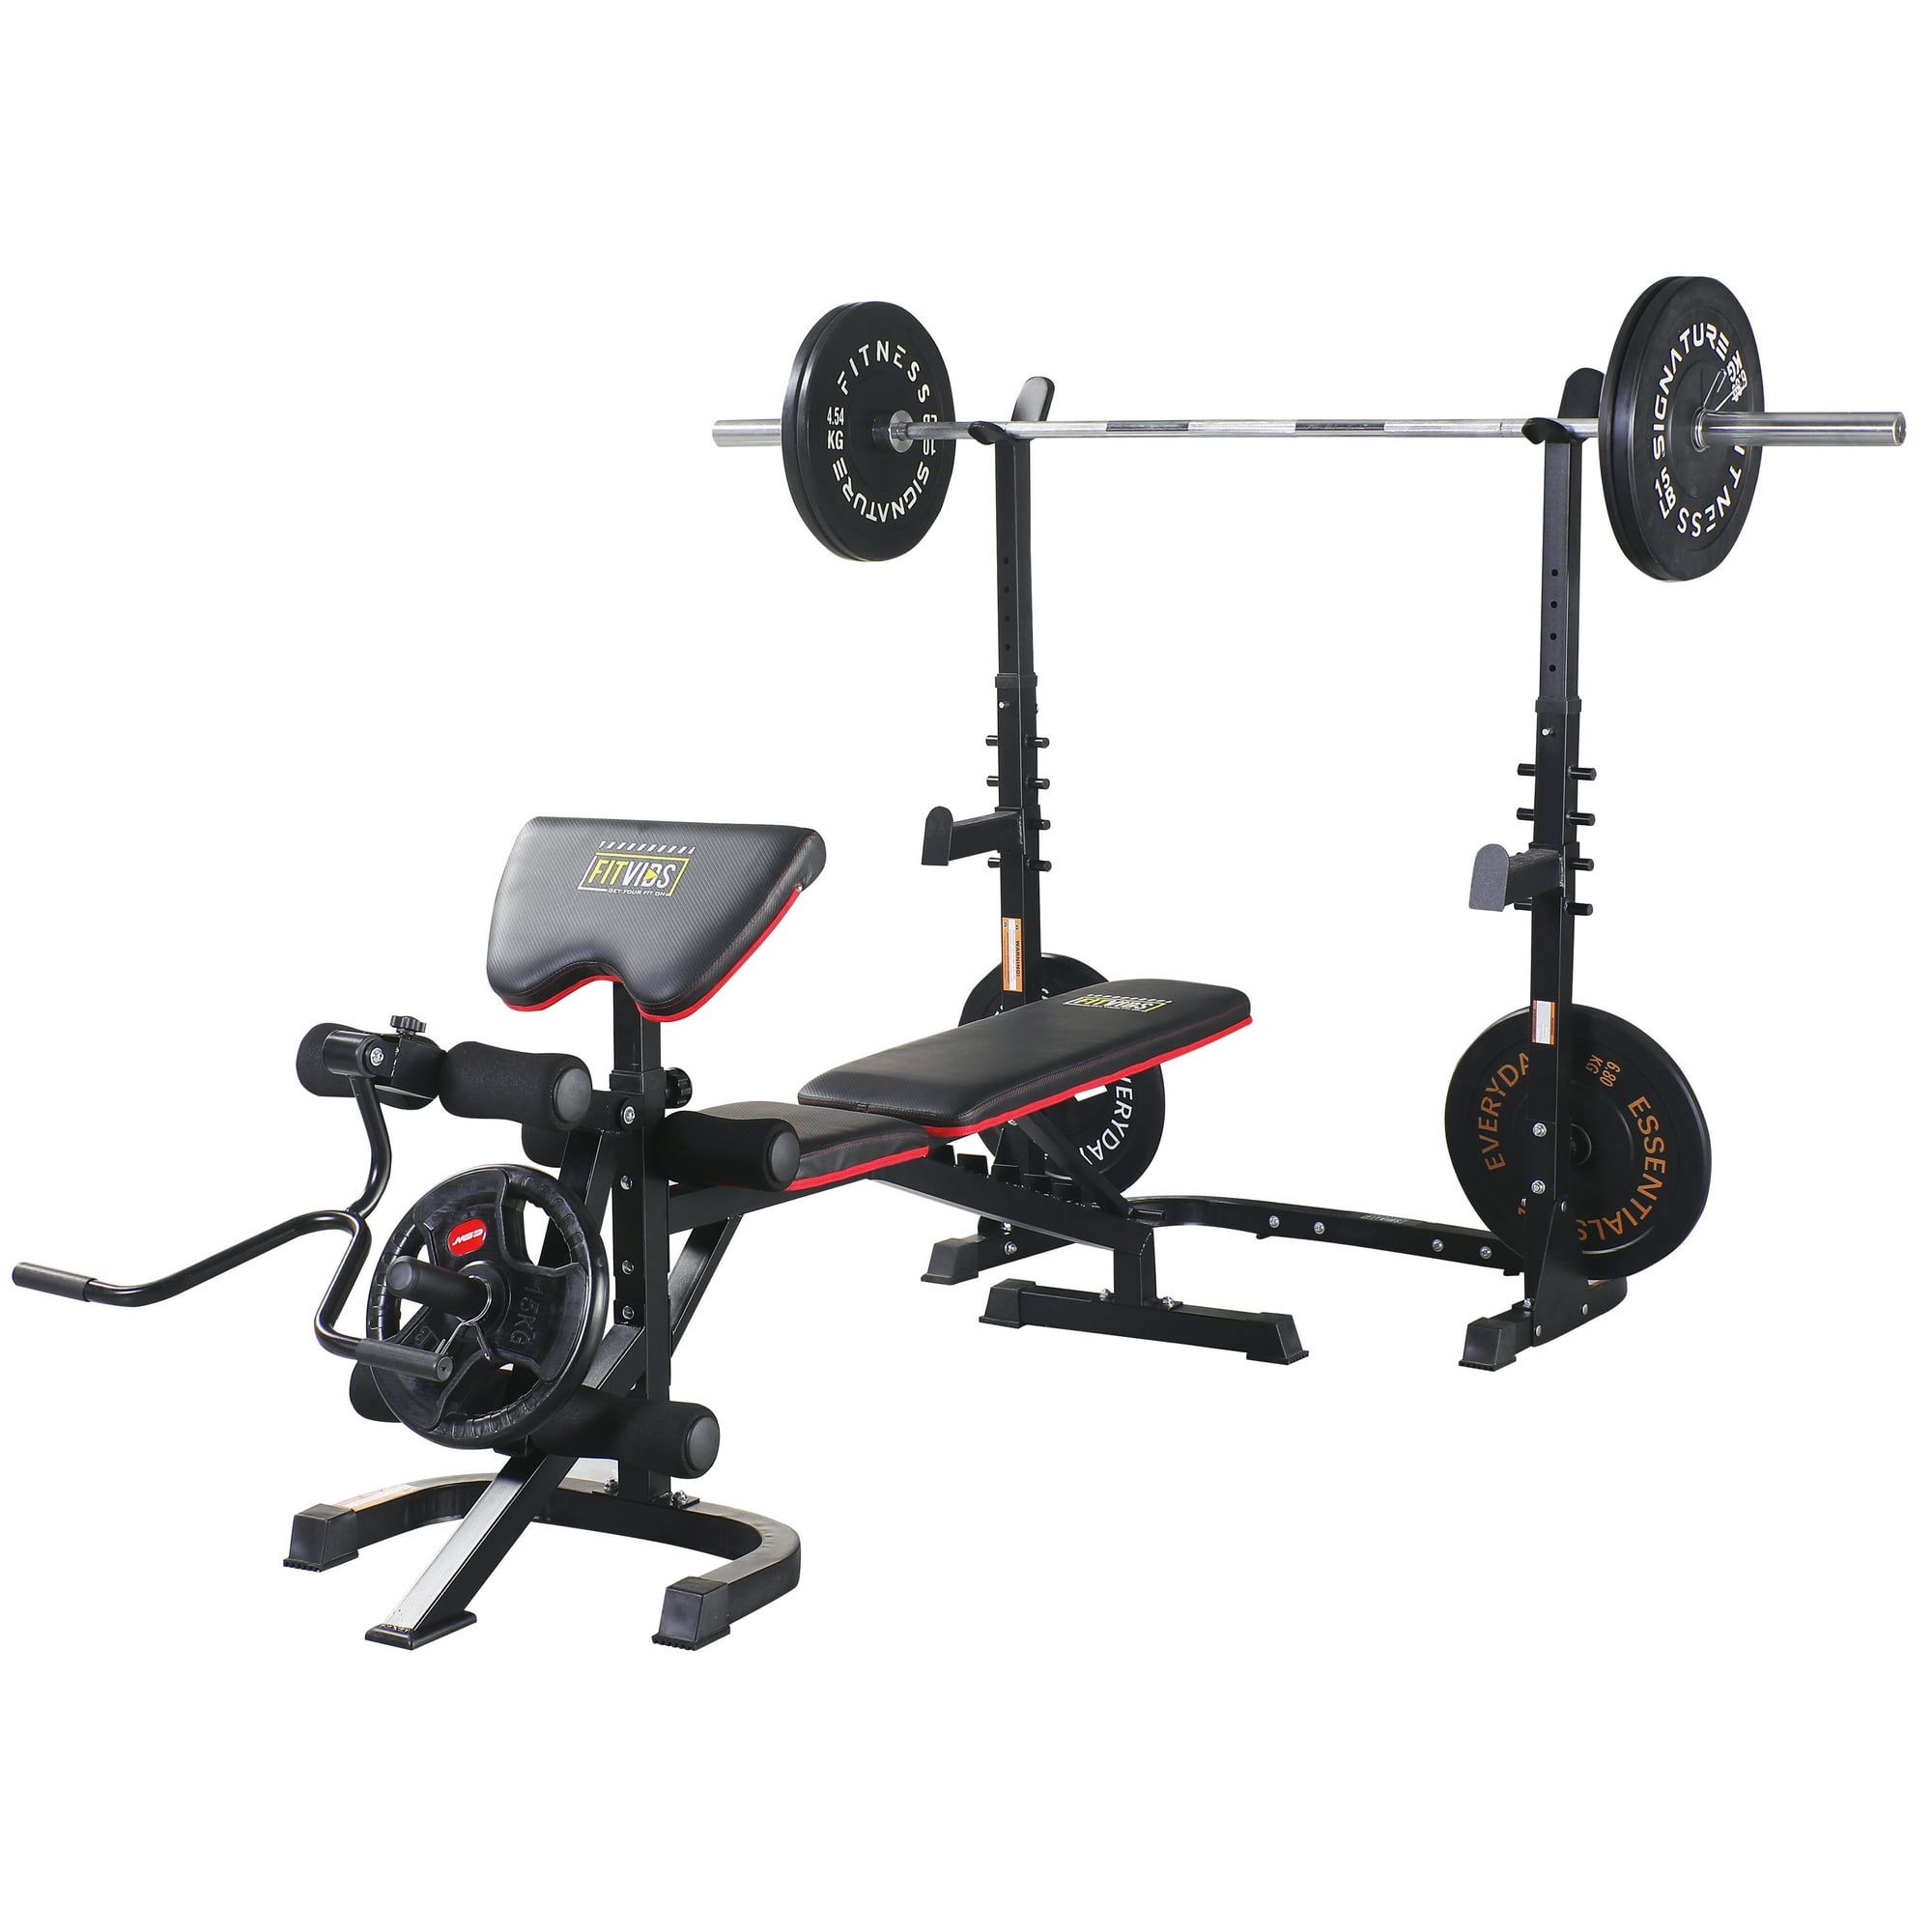 Fitvids LX600 Adjustable Olympic Workout Bench with Squat Rack, Leg Extension, Preacher Curl, and Weight Storage